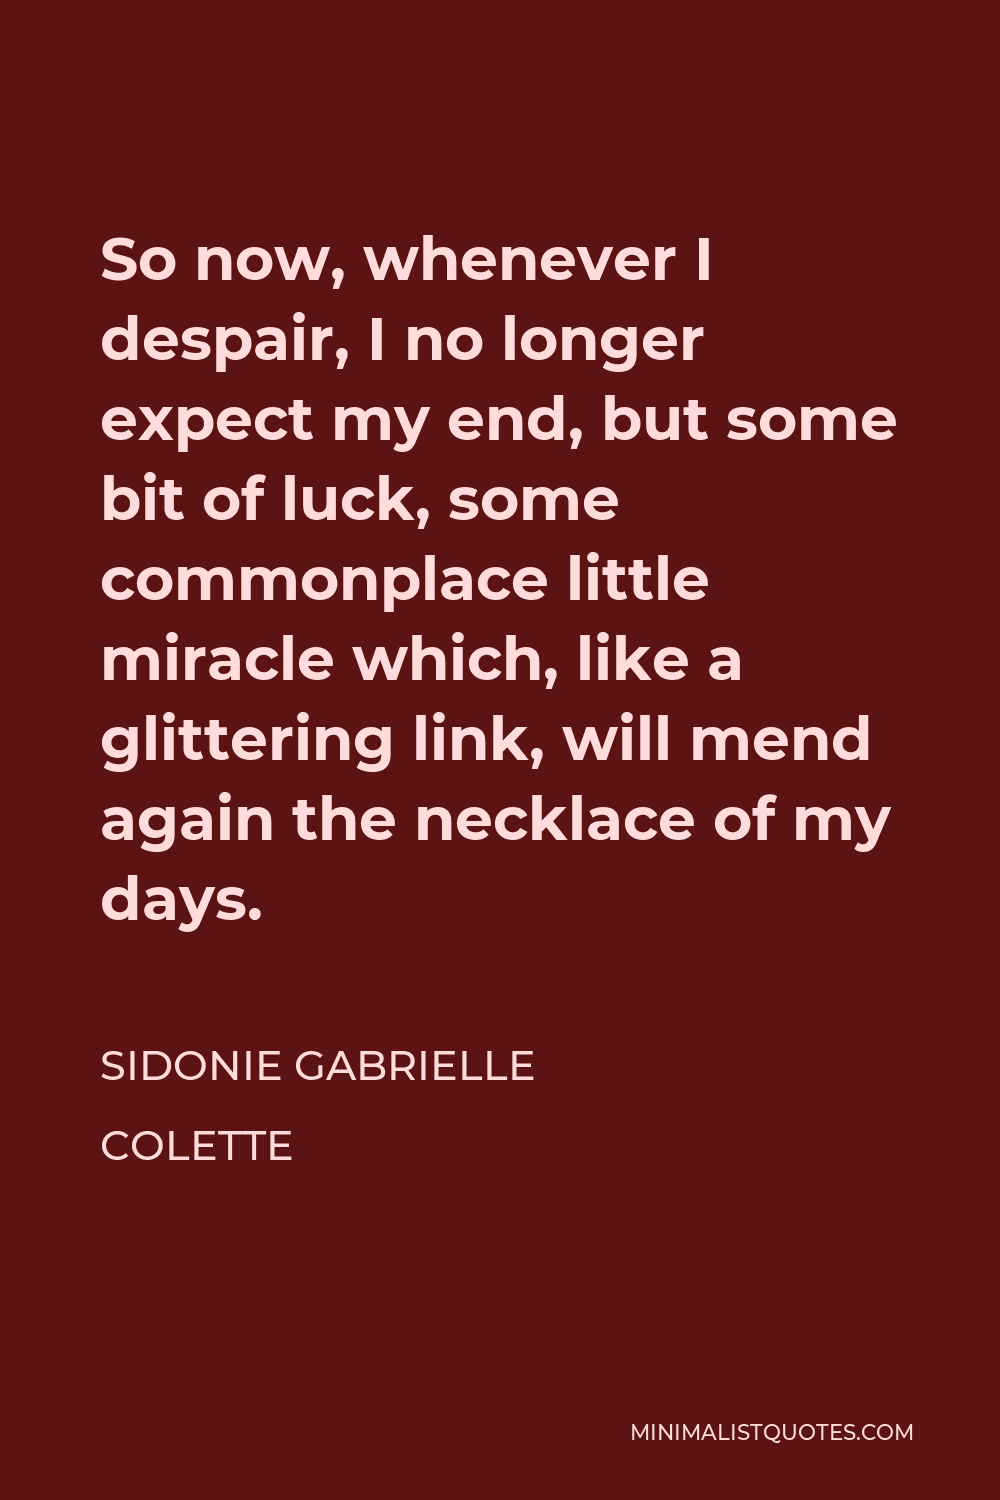 Sidonie Gabrielle Colette Quote - So now, whenever I despair, I no longer expect my end, but some bit of luck, some commonplace little miracle which, like a glittering link, will mend again the necklace of my days.